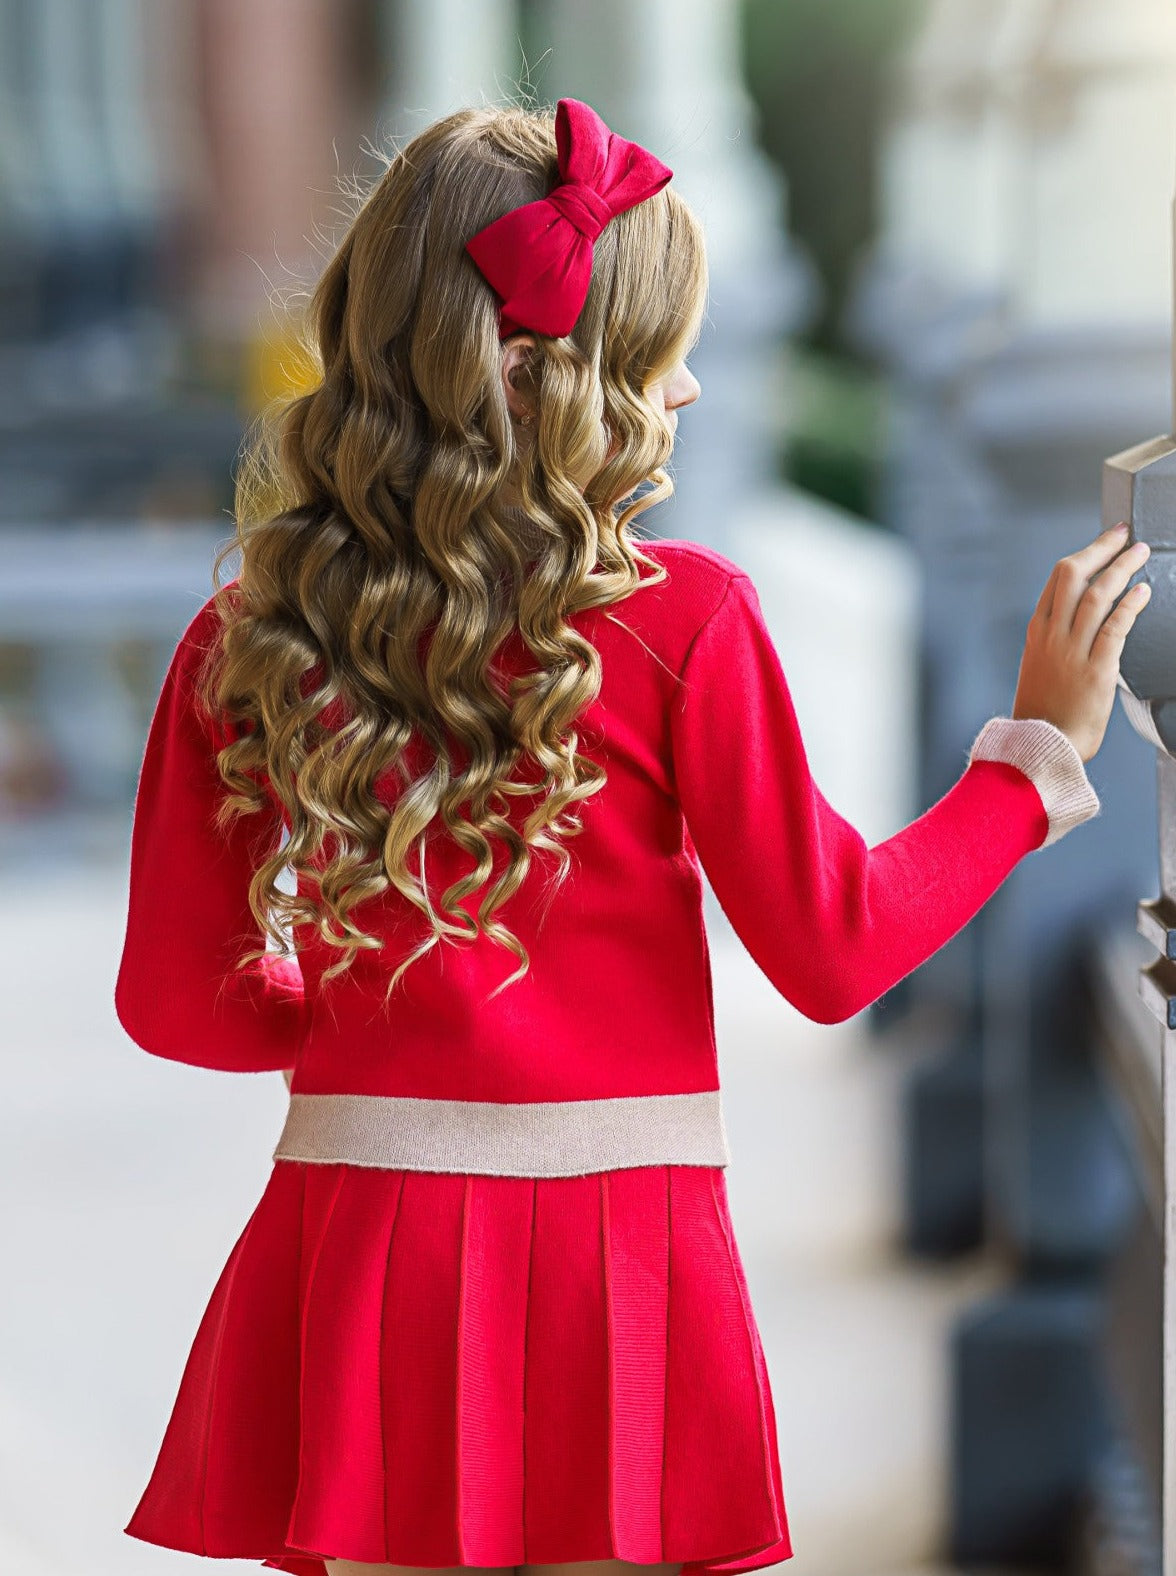 Girls Preppy Chic Clothes | Red Cardigan & Skirt Set | Mia Belle Girls